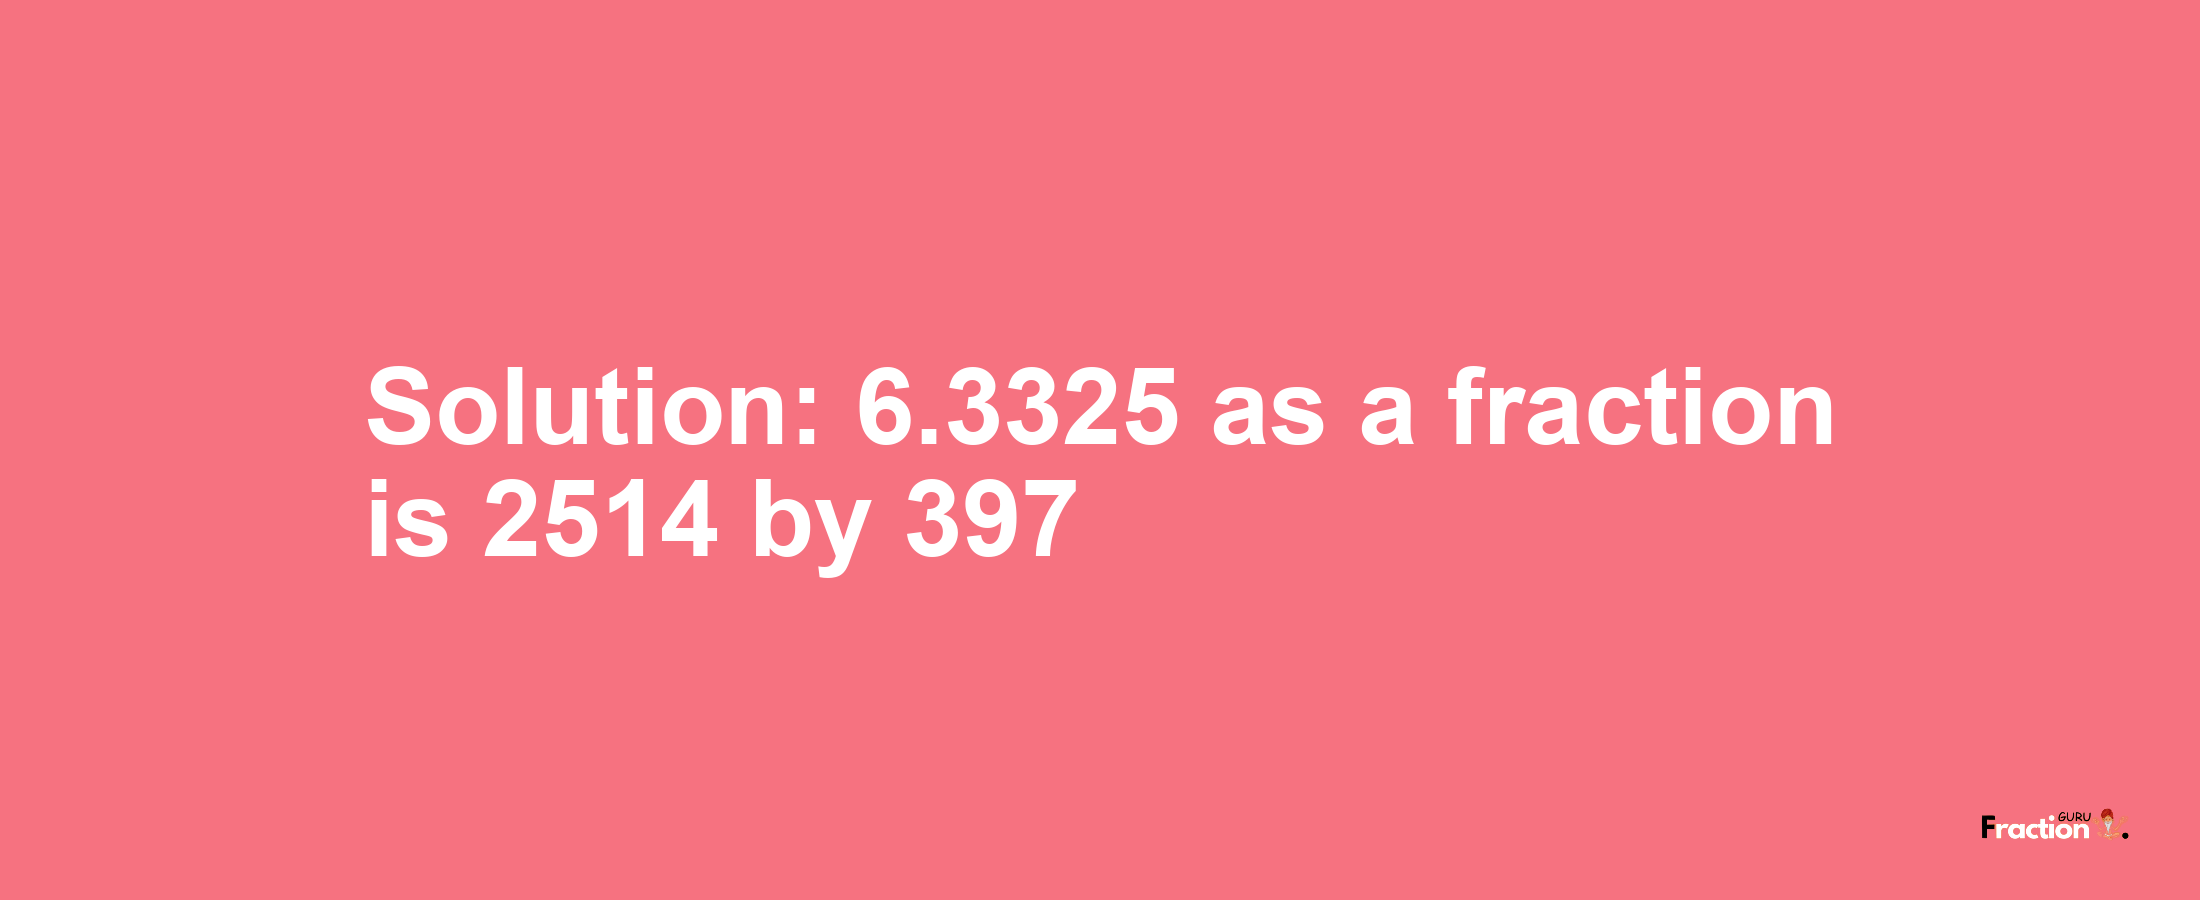 Solution:6.3325 as a fraction is 2514/397